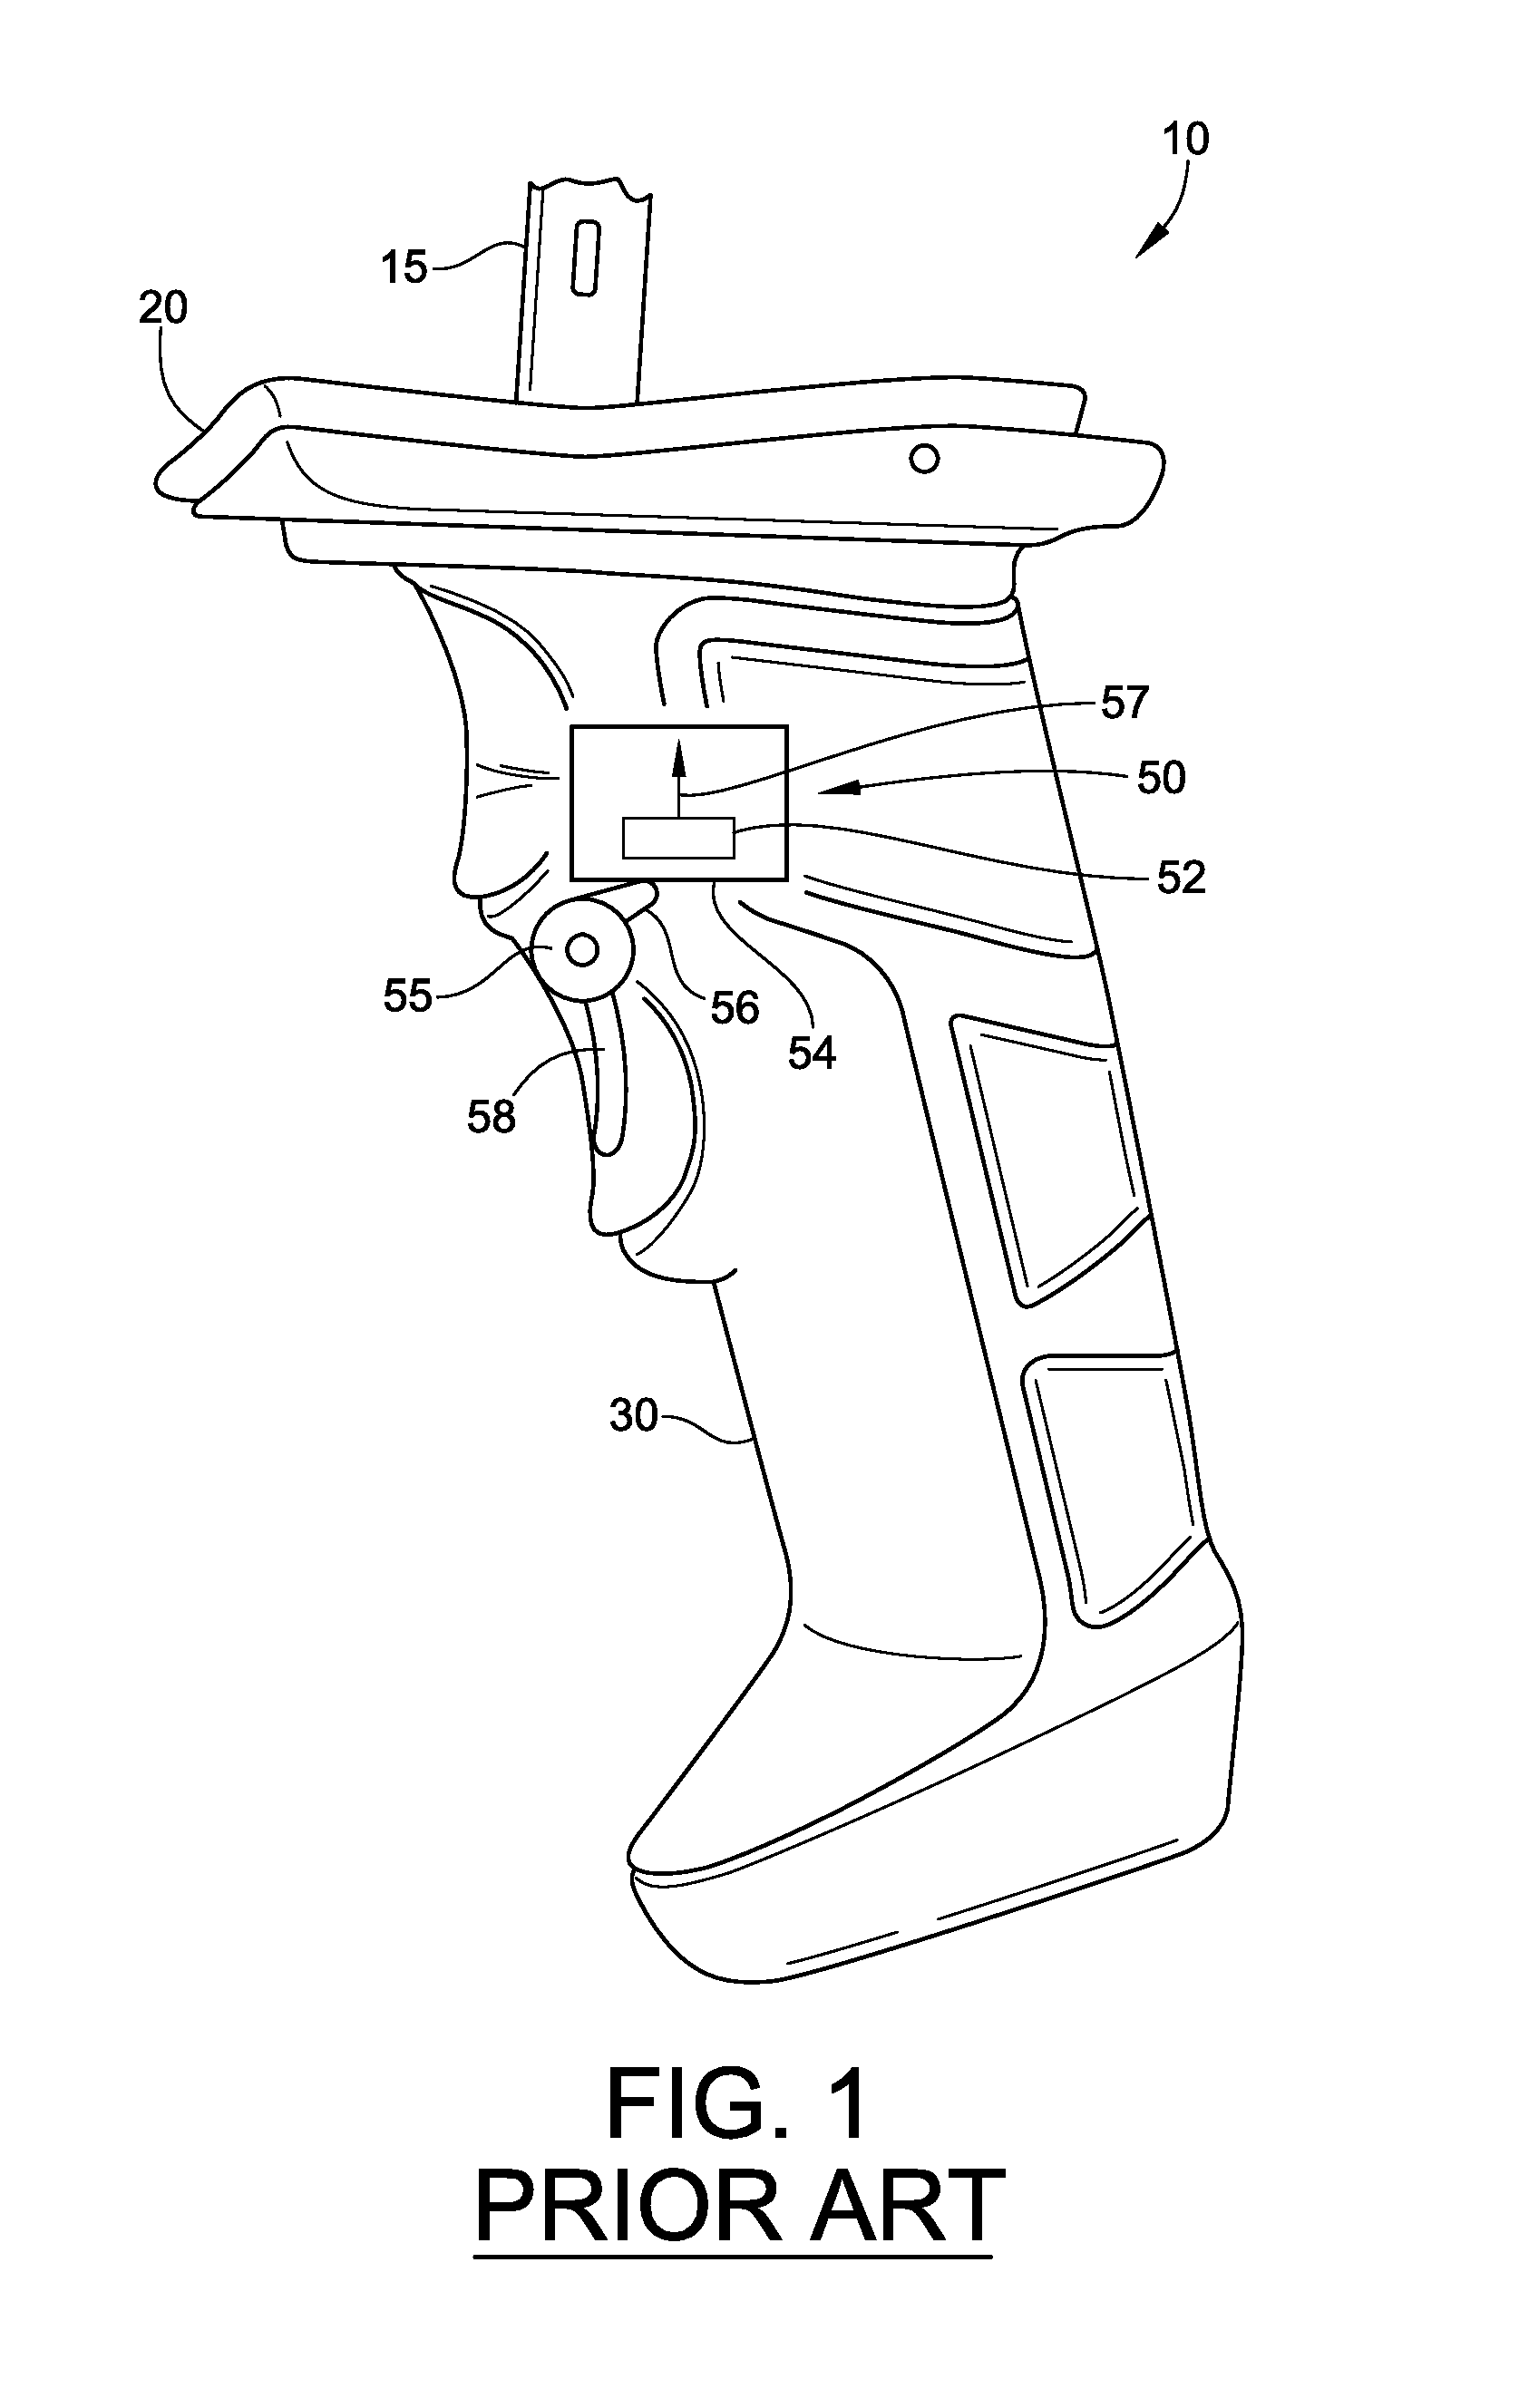 Trigger device for mobile computing device